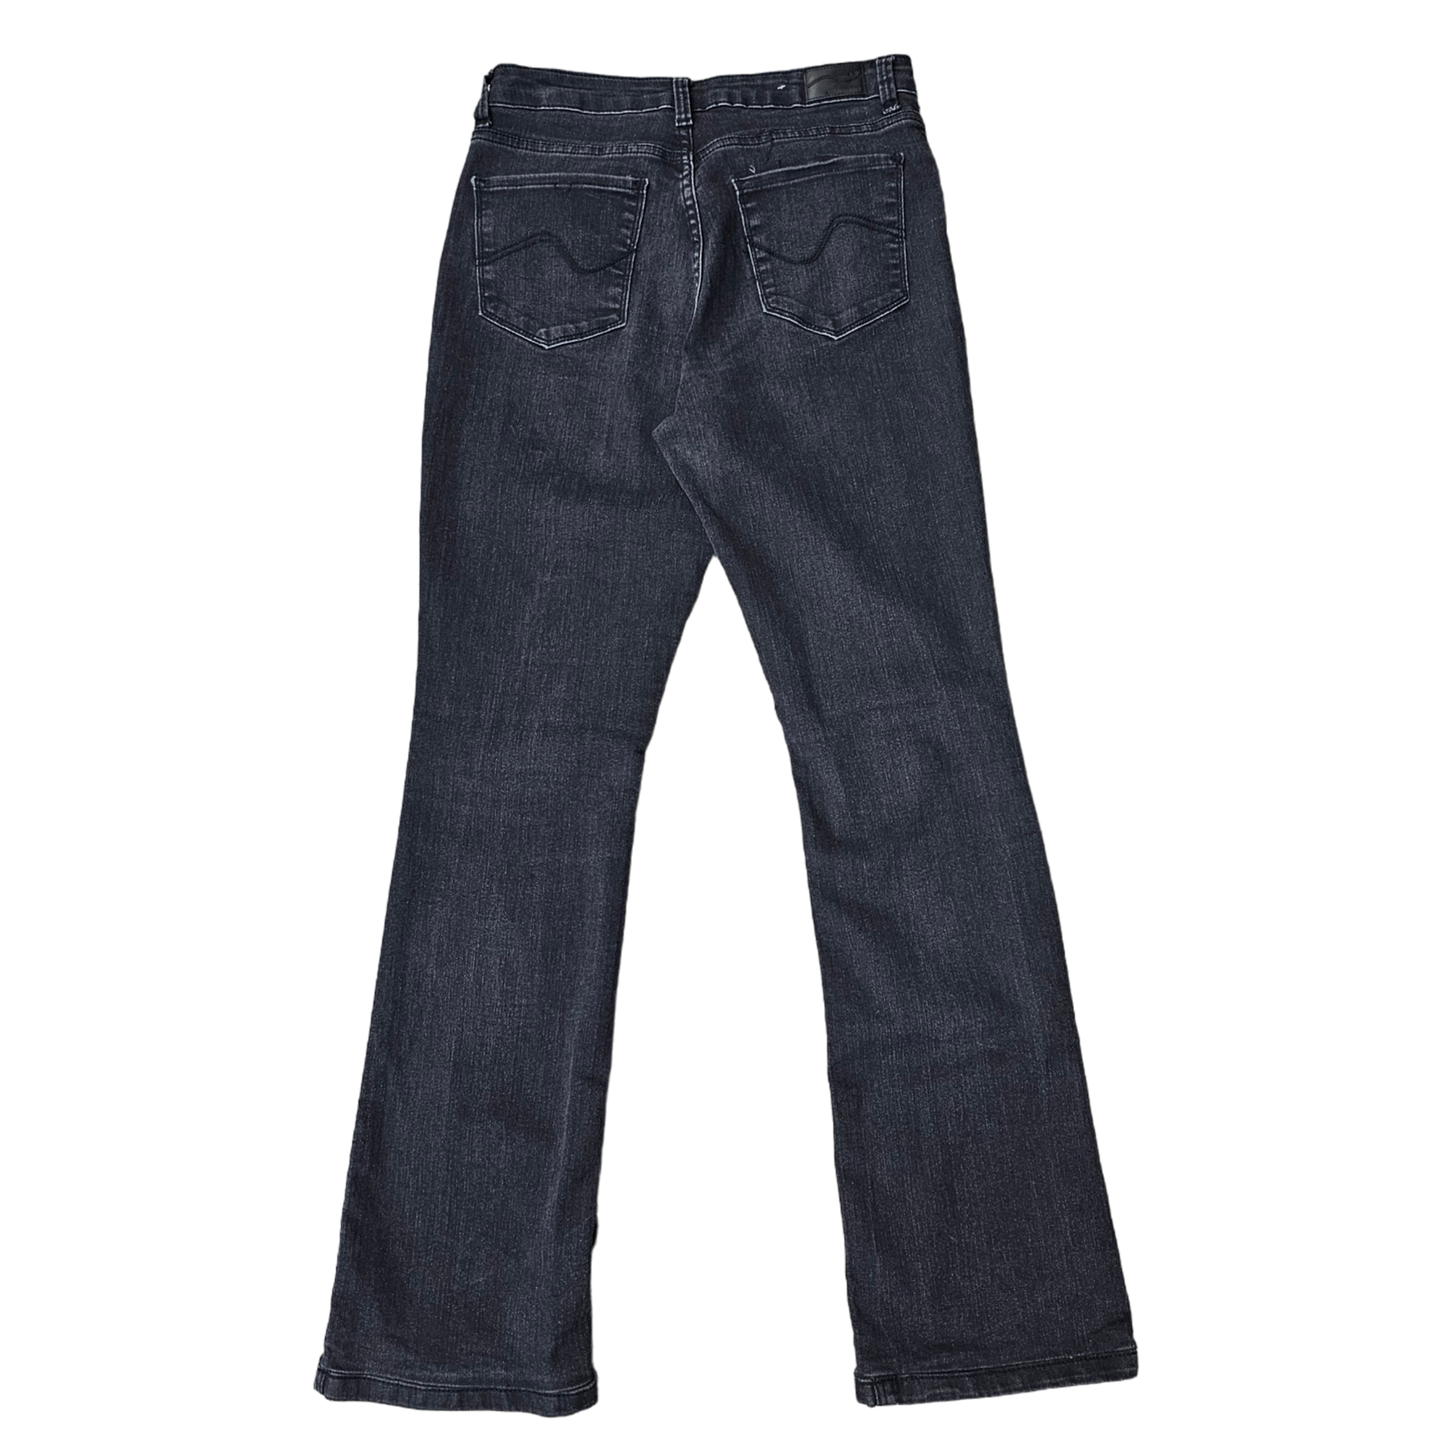 Jeans Straight By taco jeans Size: 4